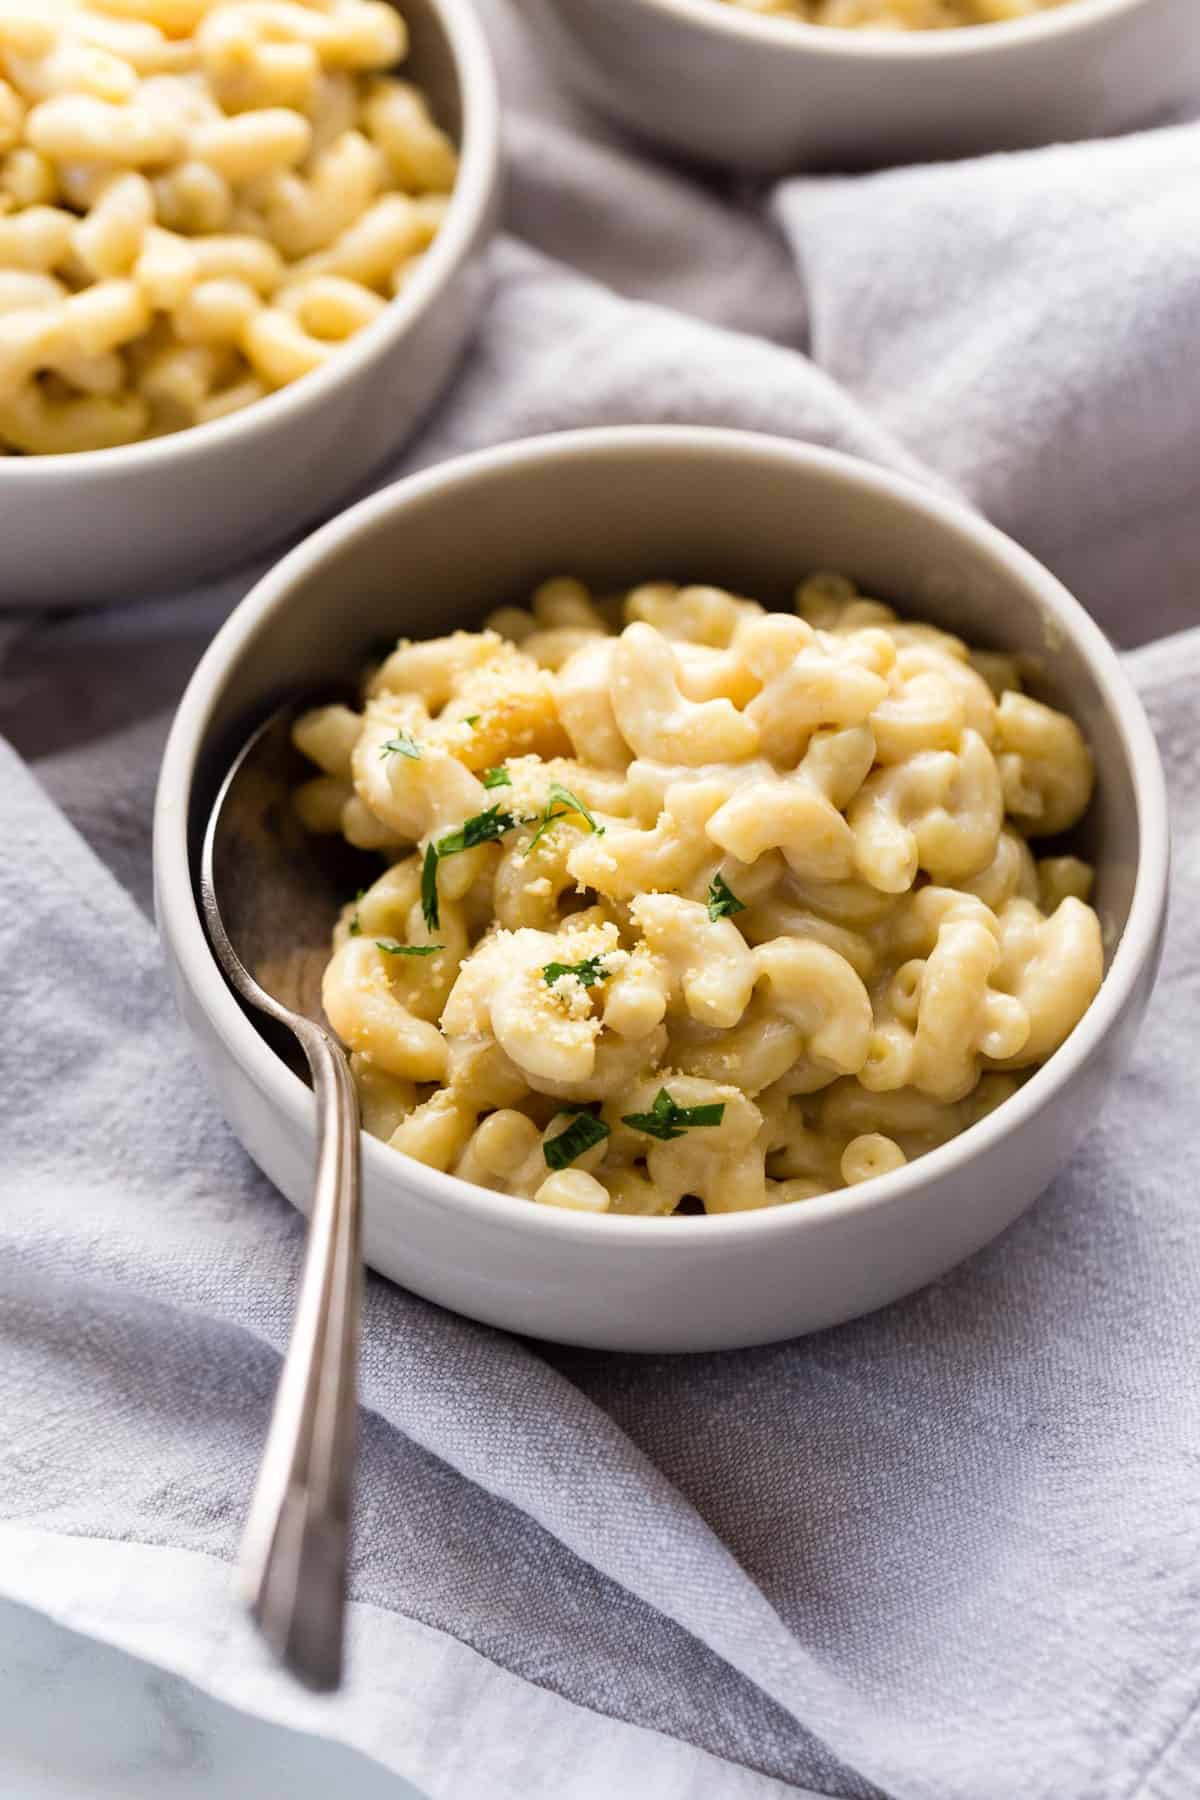 Wander Convention Sprinkle Vegan Mac and Cheese (Easy! 1 Pot + 20 Minutes) » I LOVE VEGAN